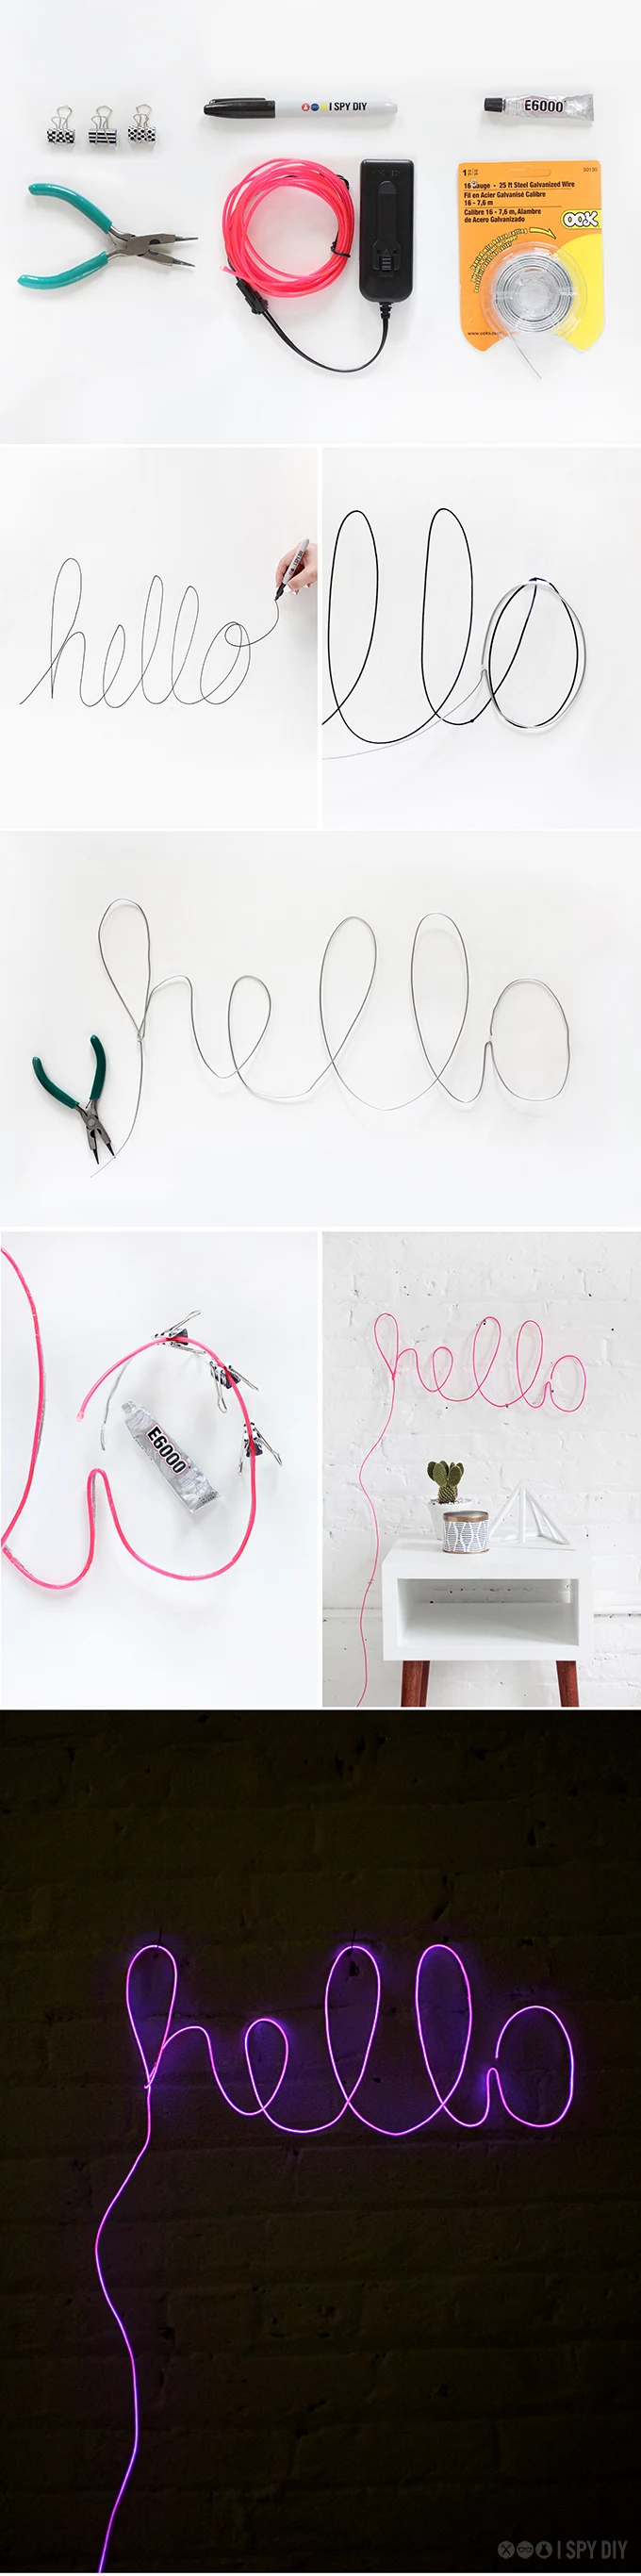 bulldog clips and a 3D marker, glue and pliers, light-up neon pink cord, and some wire, diy shining hello sign